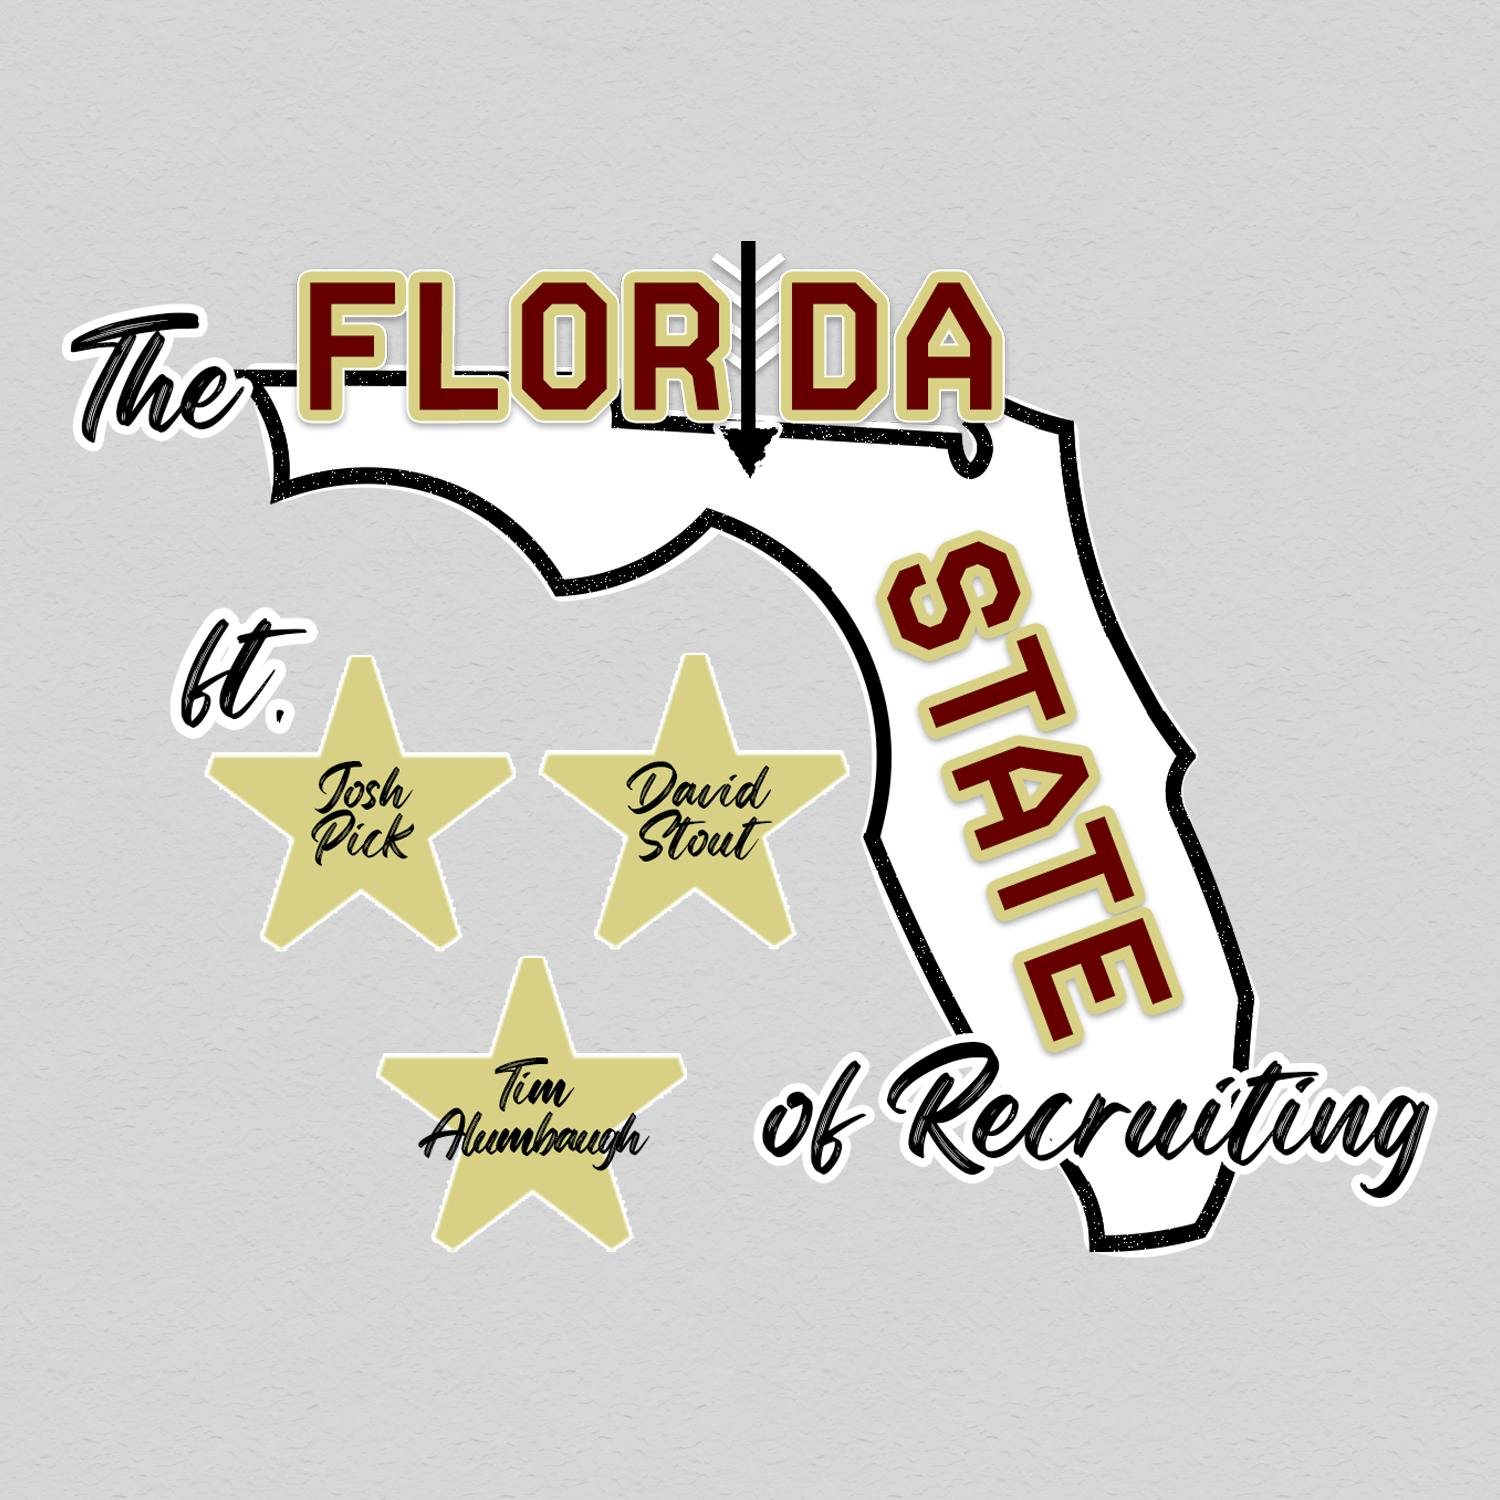 FSU recruiting: Breaking down Florida State's transfer portal pickups on defense -- what are Seminoles getting in latest crop of defensive players?